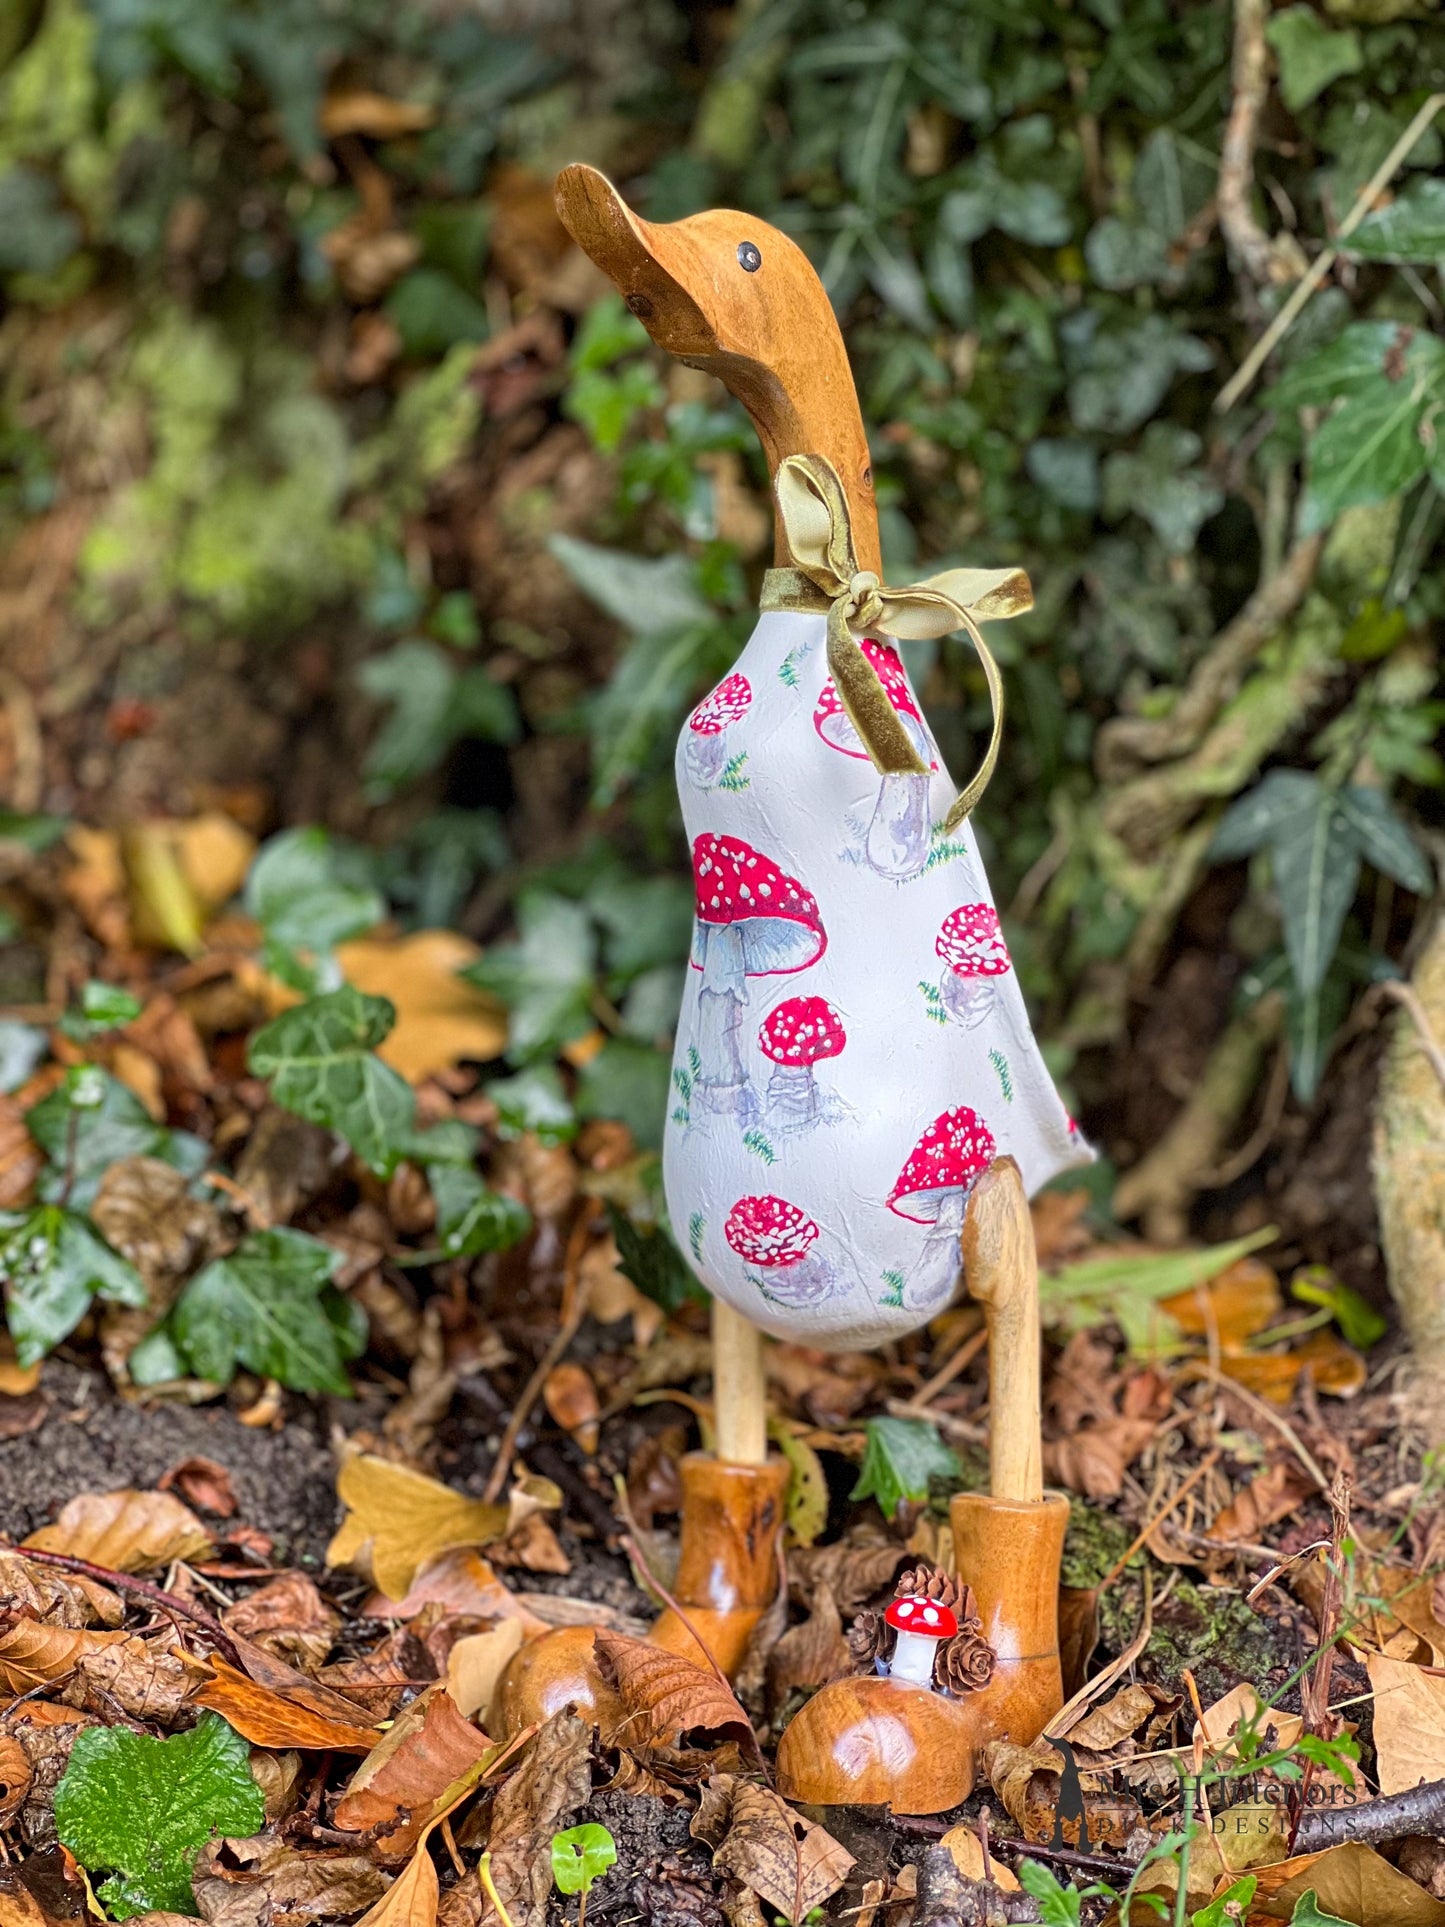 Tilly Toadstool - Decorated Wooden Duck in Boots by Mrs H the Duck Lady